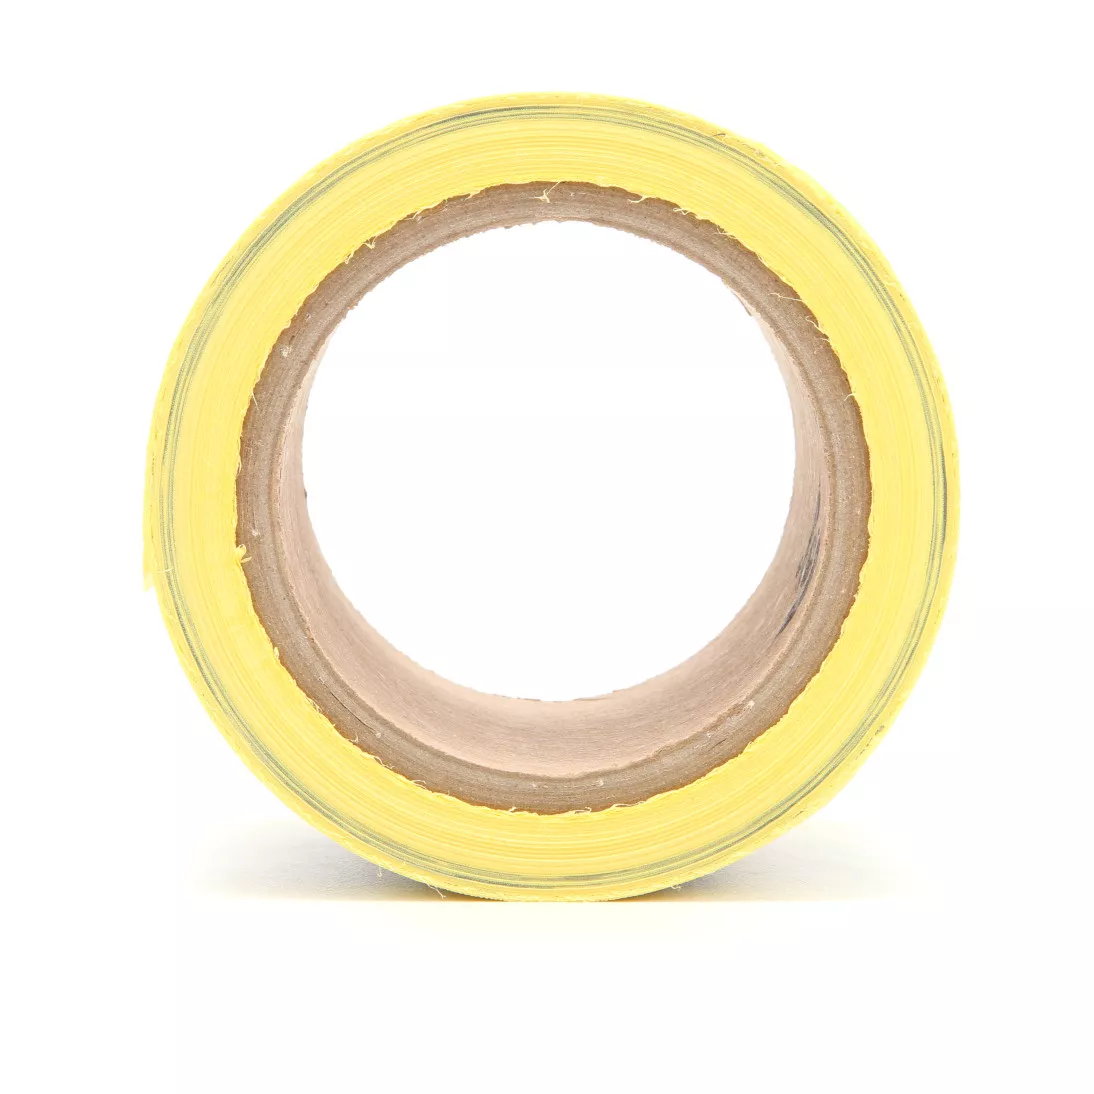 Scotch® Buried Barricade Tape 374, CAUTION BURIED TELEPHONE LINE BELOW,
3 in x 300 ft, Yellow, 16 rolls/Case